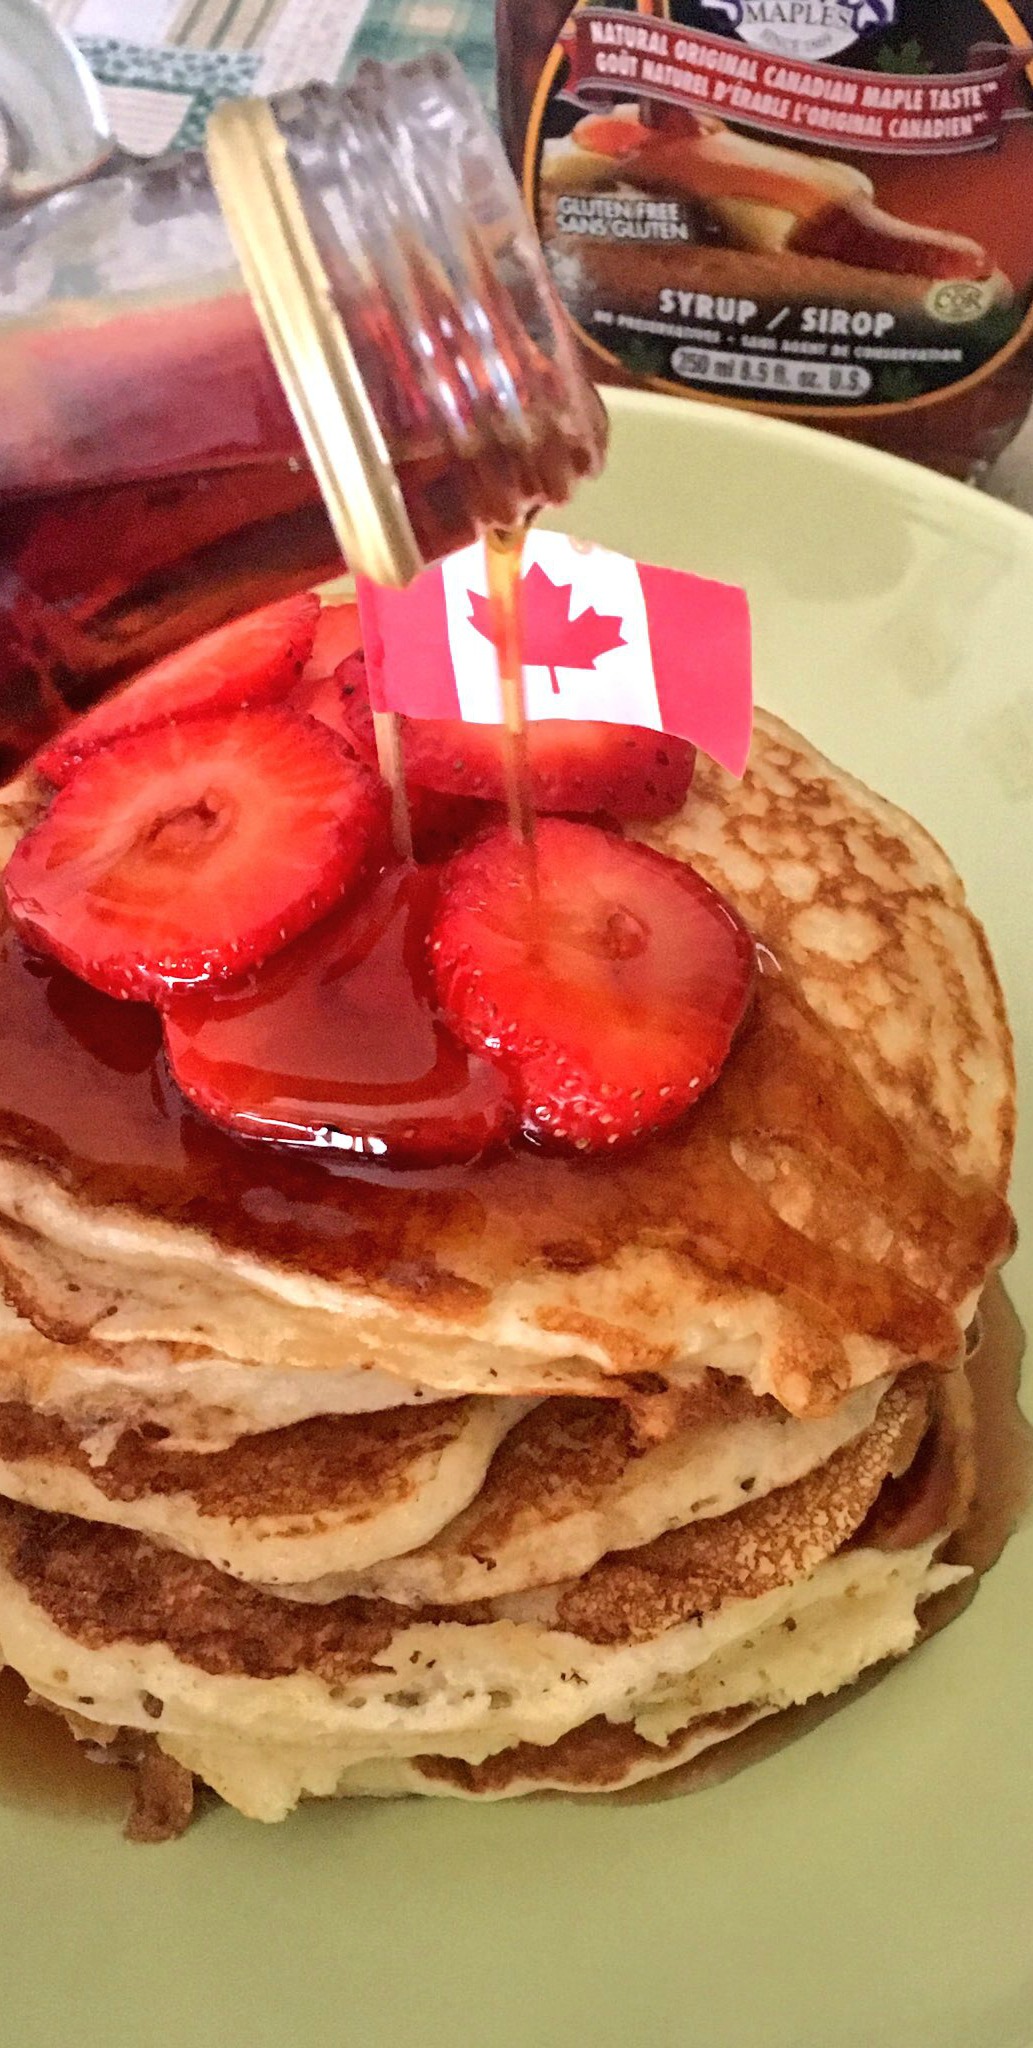 Pancakes con sciroppo d’acero /Pancakes with maple syrup… Oh
Canada…